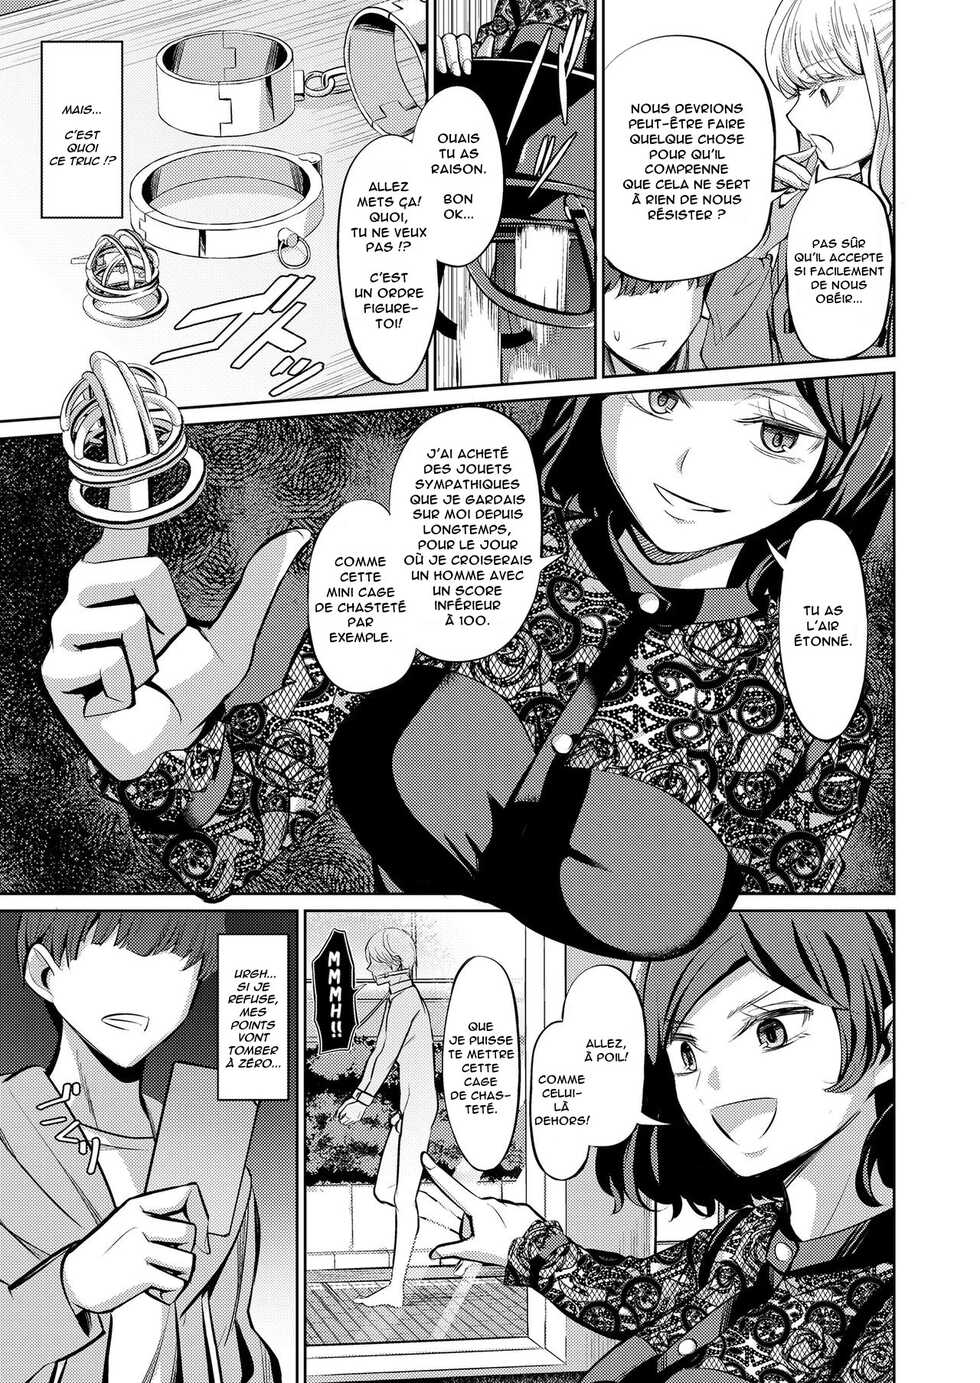 [Yamahata Rian] Tensuushugi no Kuni | A Country Based on Point System (Girls forM Vol. 20) [French] [Anatoh] [Digital] - Page 9